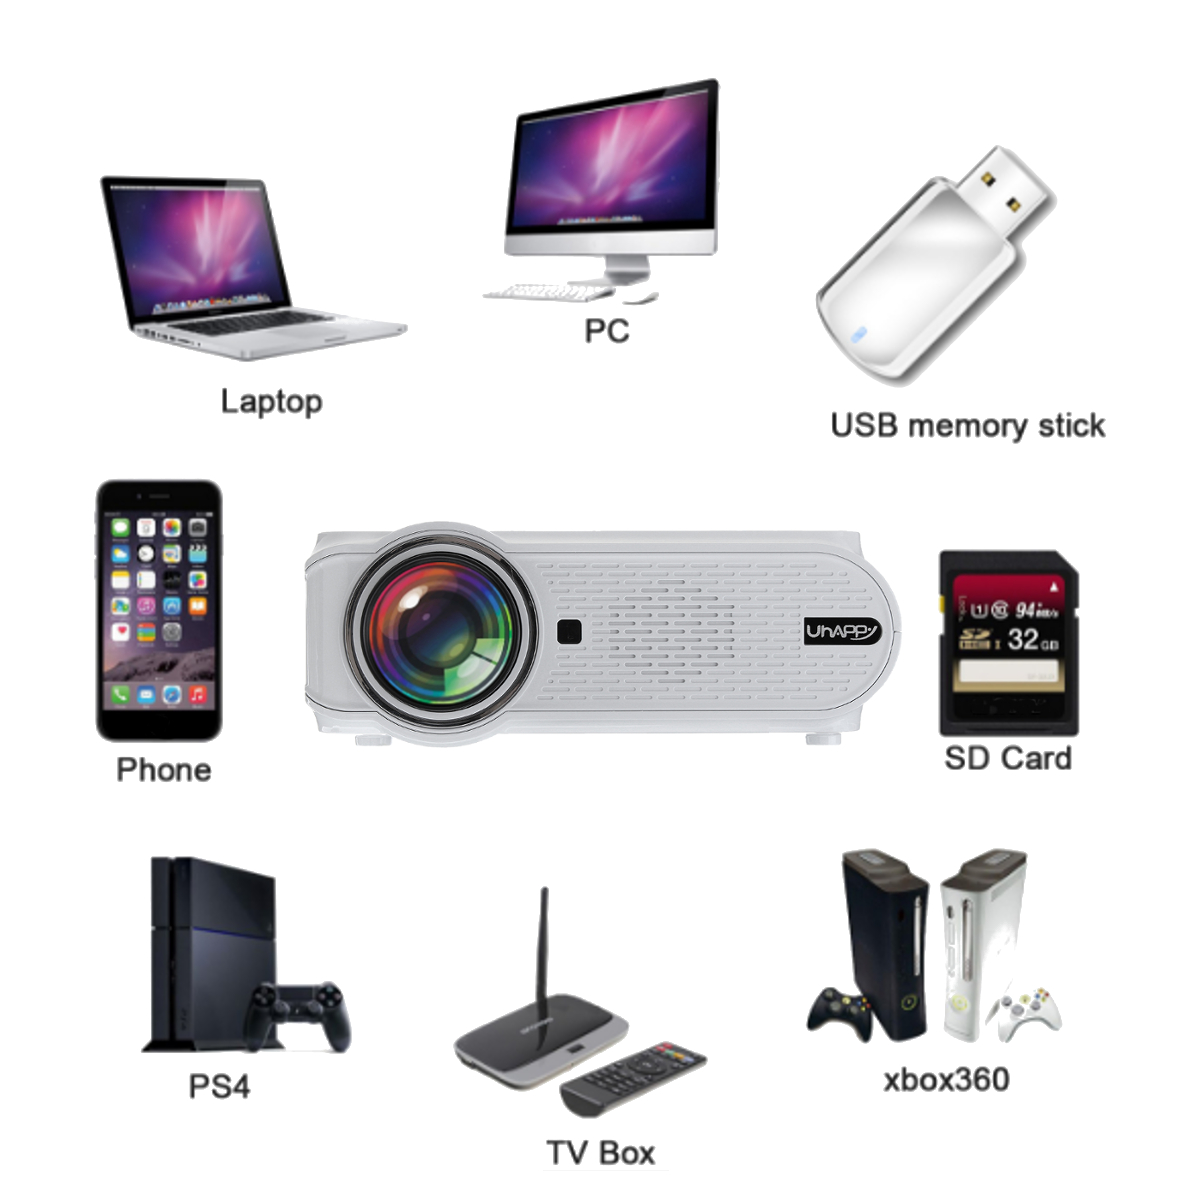 Uhappy-U90-Full-HD-1080P-7000-Lumens-Smart-Projector-TV-Home-Theater-with-Remote-Control-White-1221827